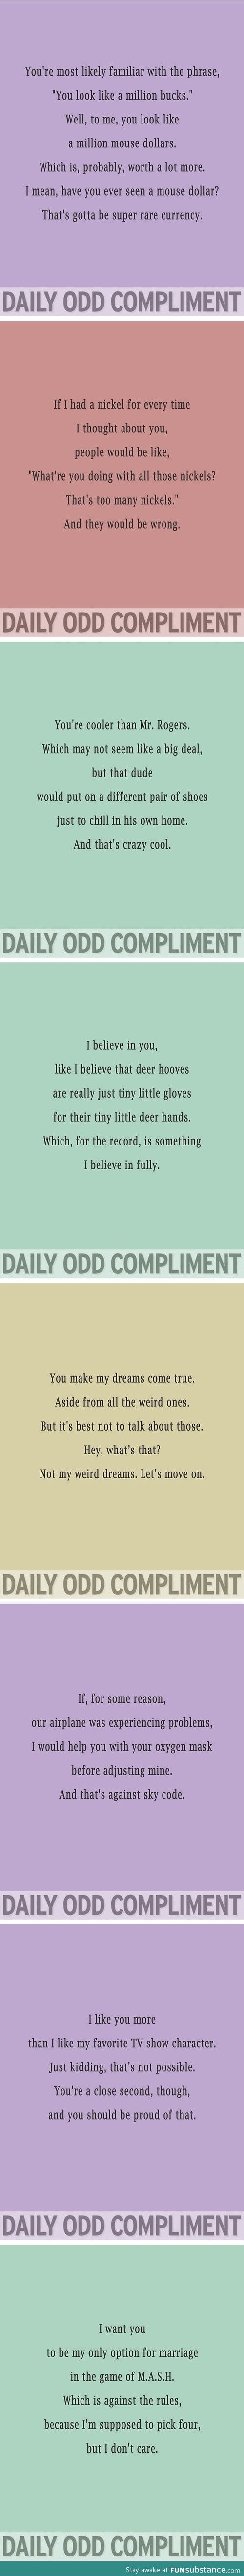 Daily odd compliment